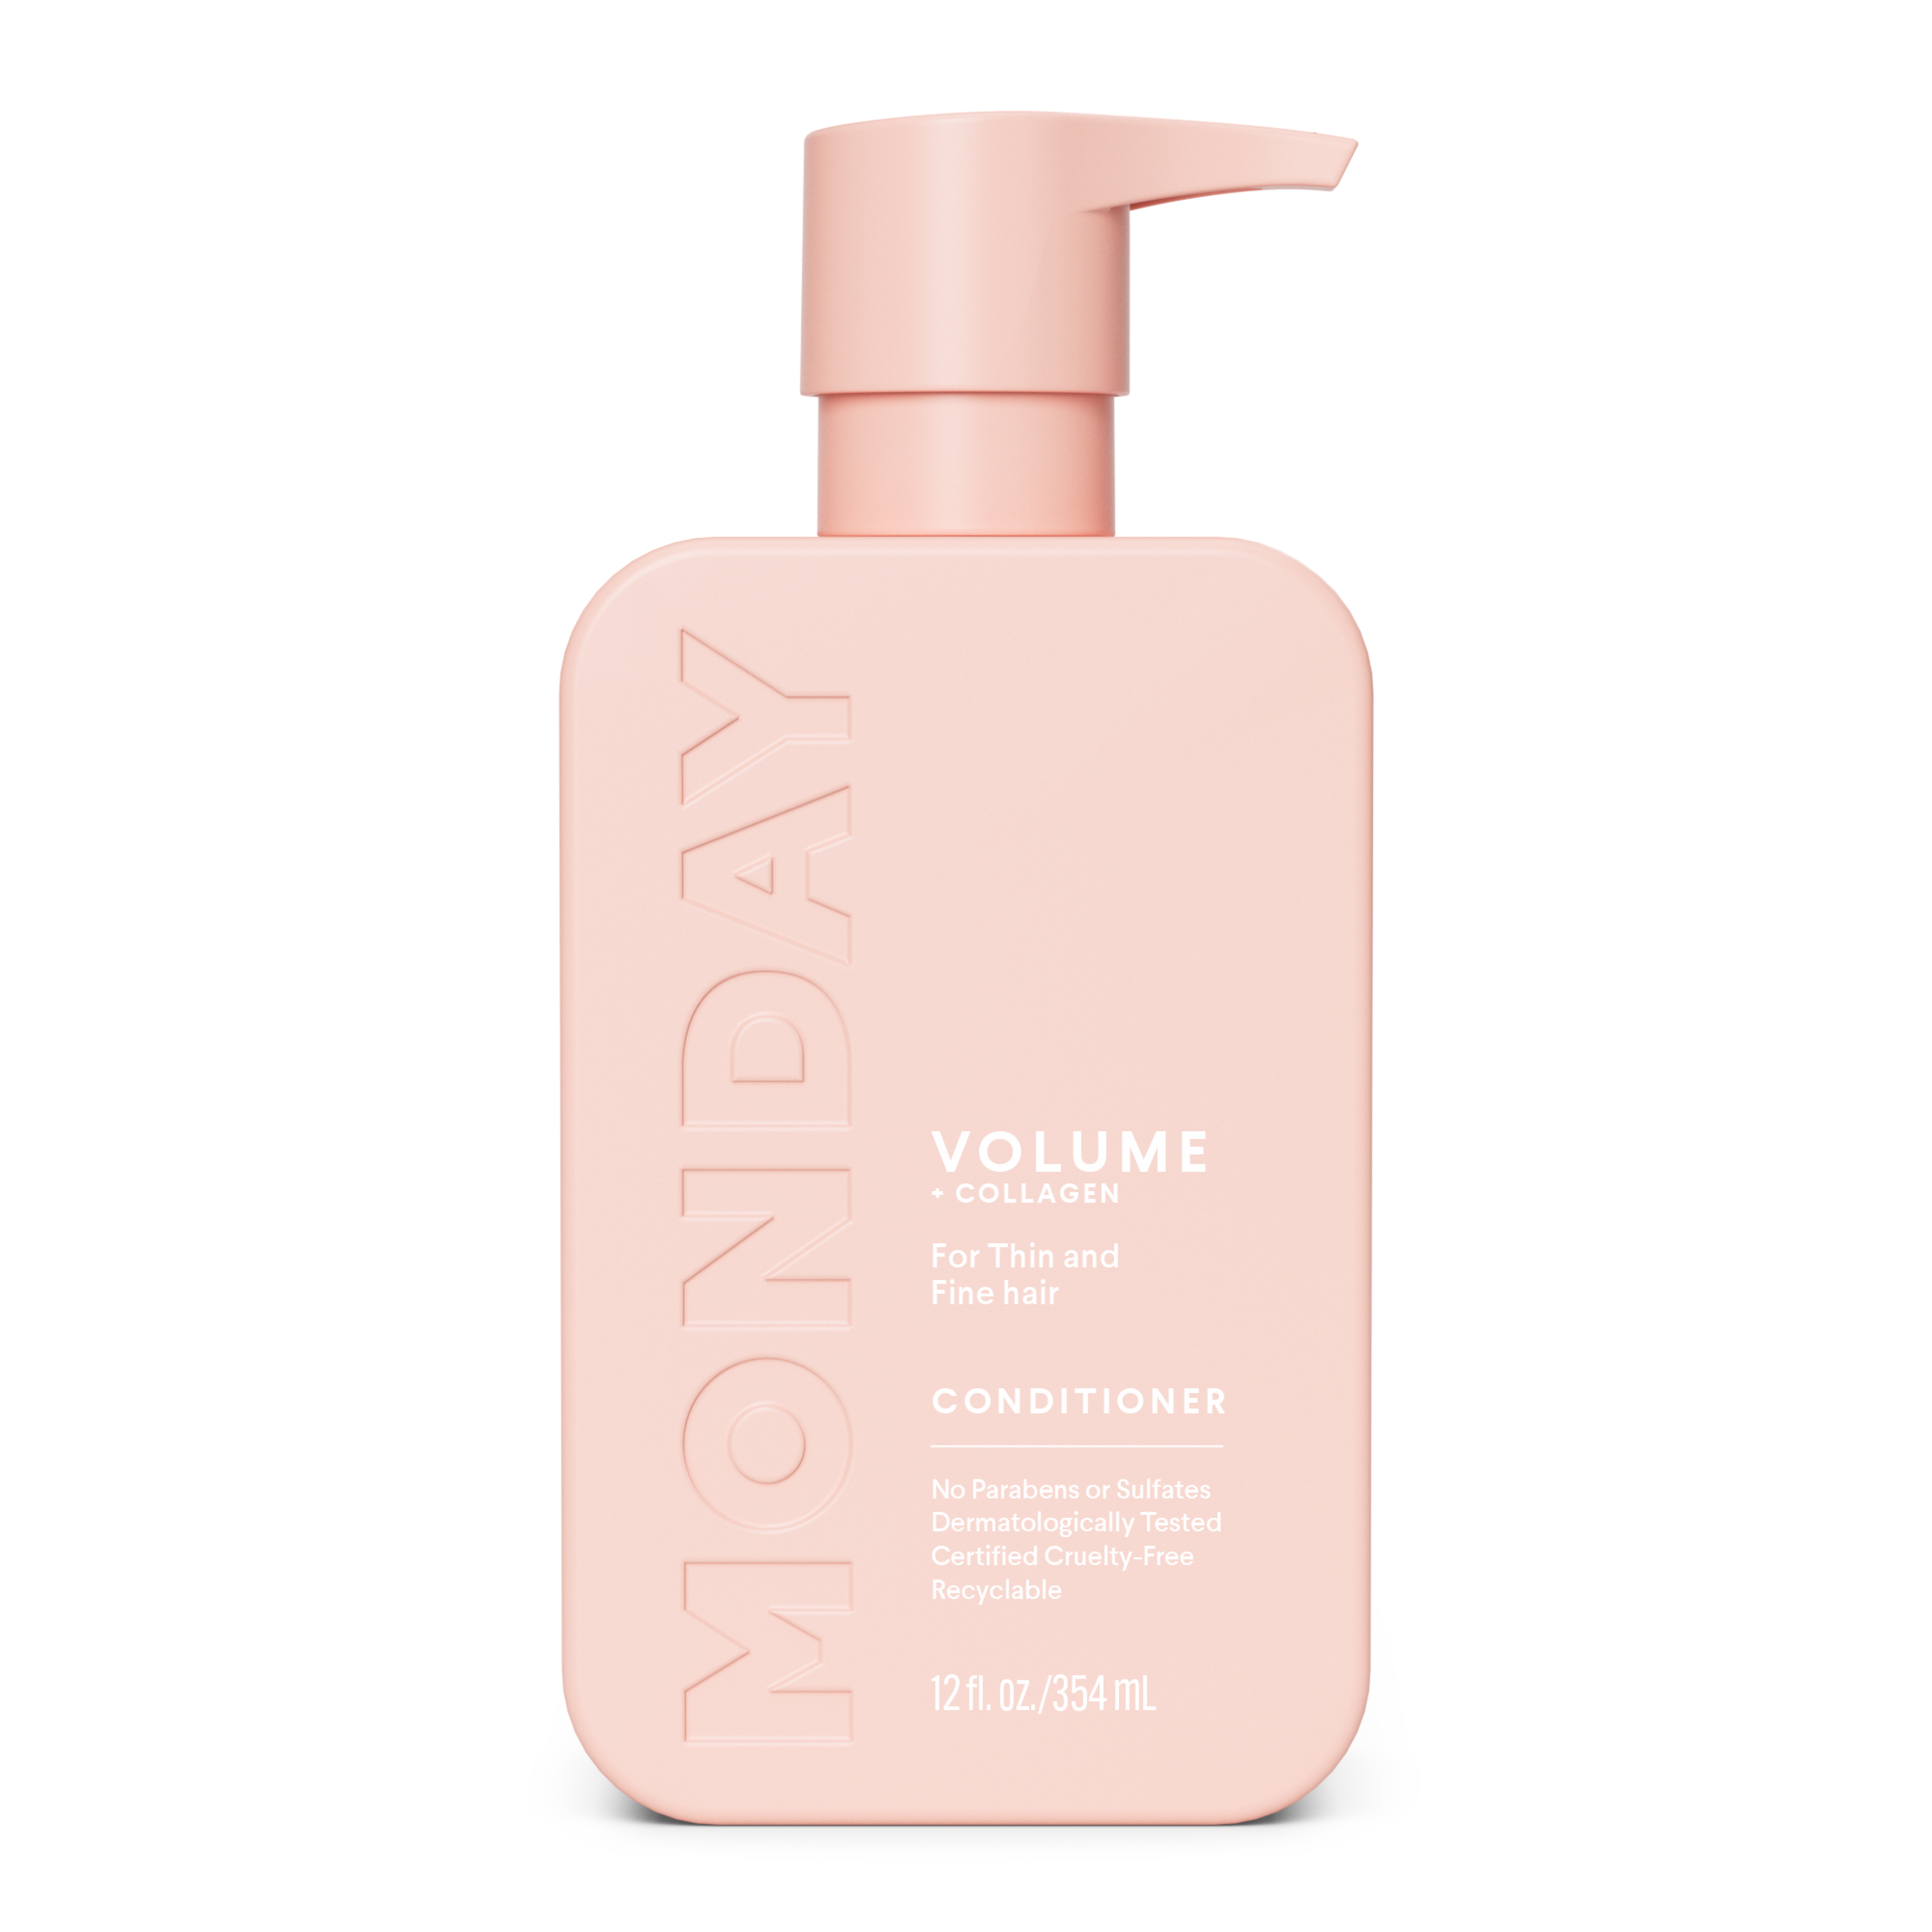 MONDAY Haircare VOLUME Conditioner Sulfate- and Paraben-Free 354ml (12oz) - image 1 of 5